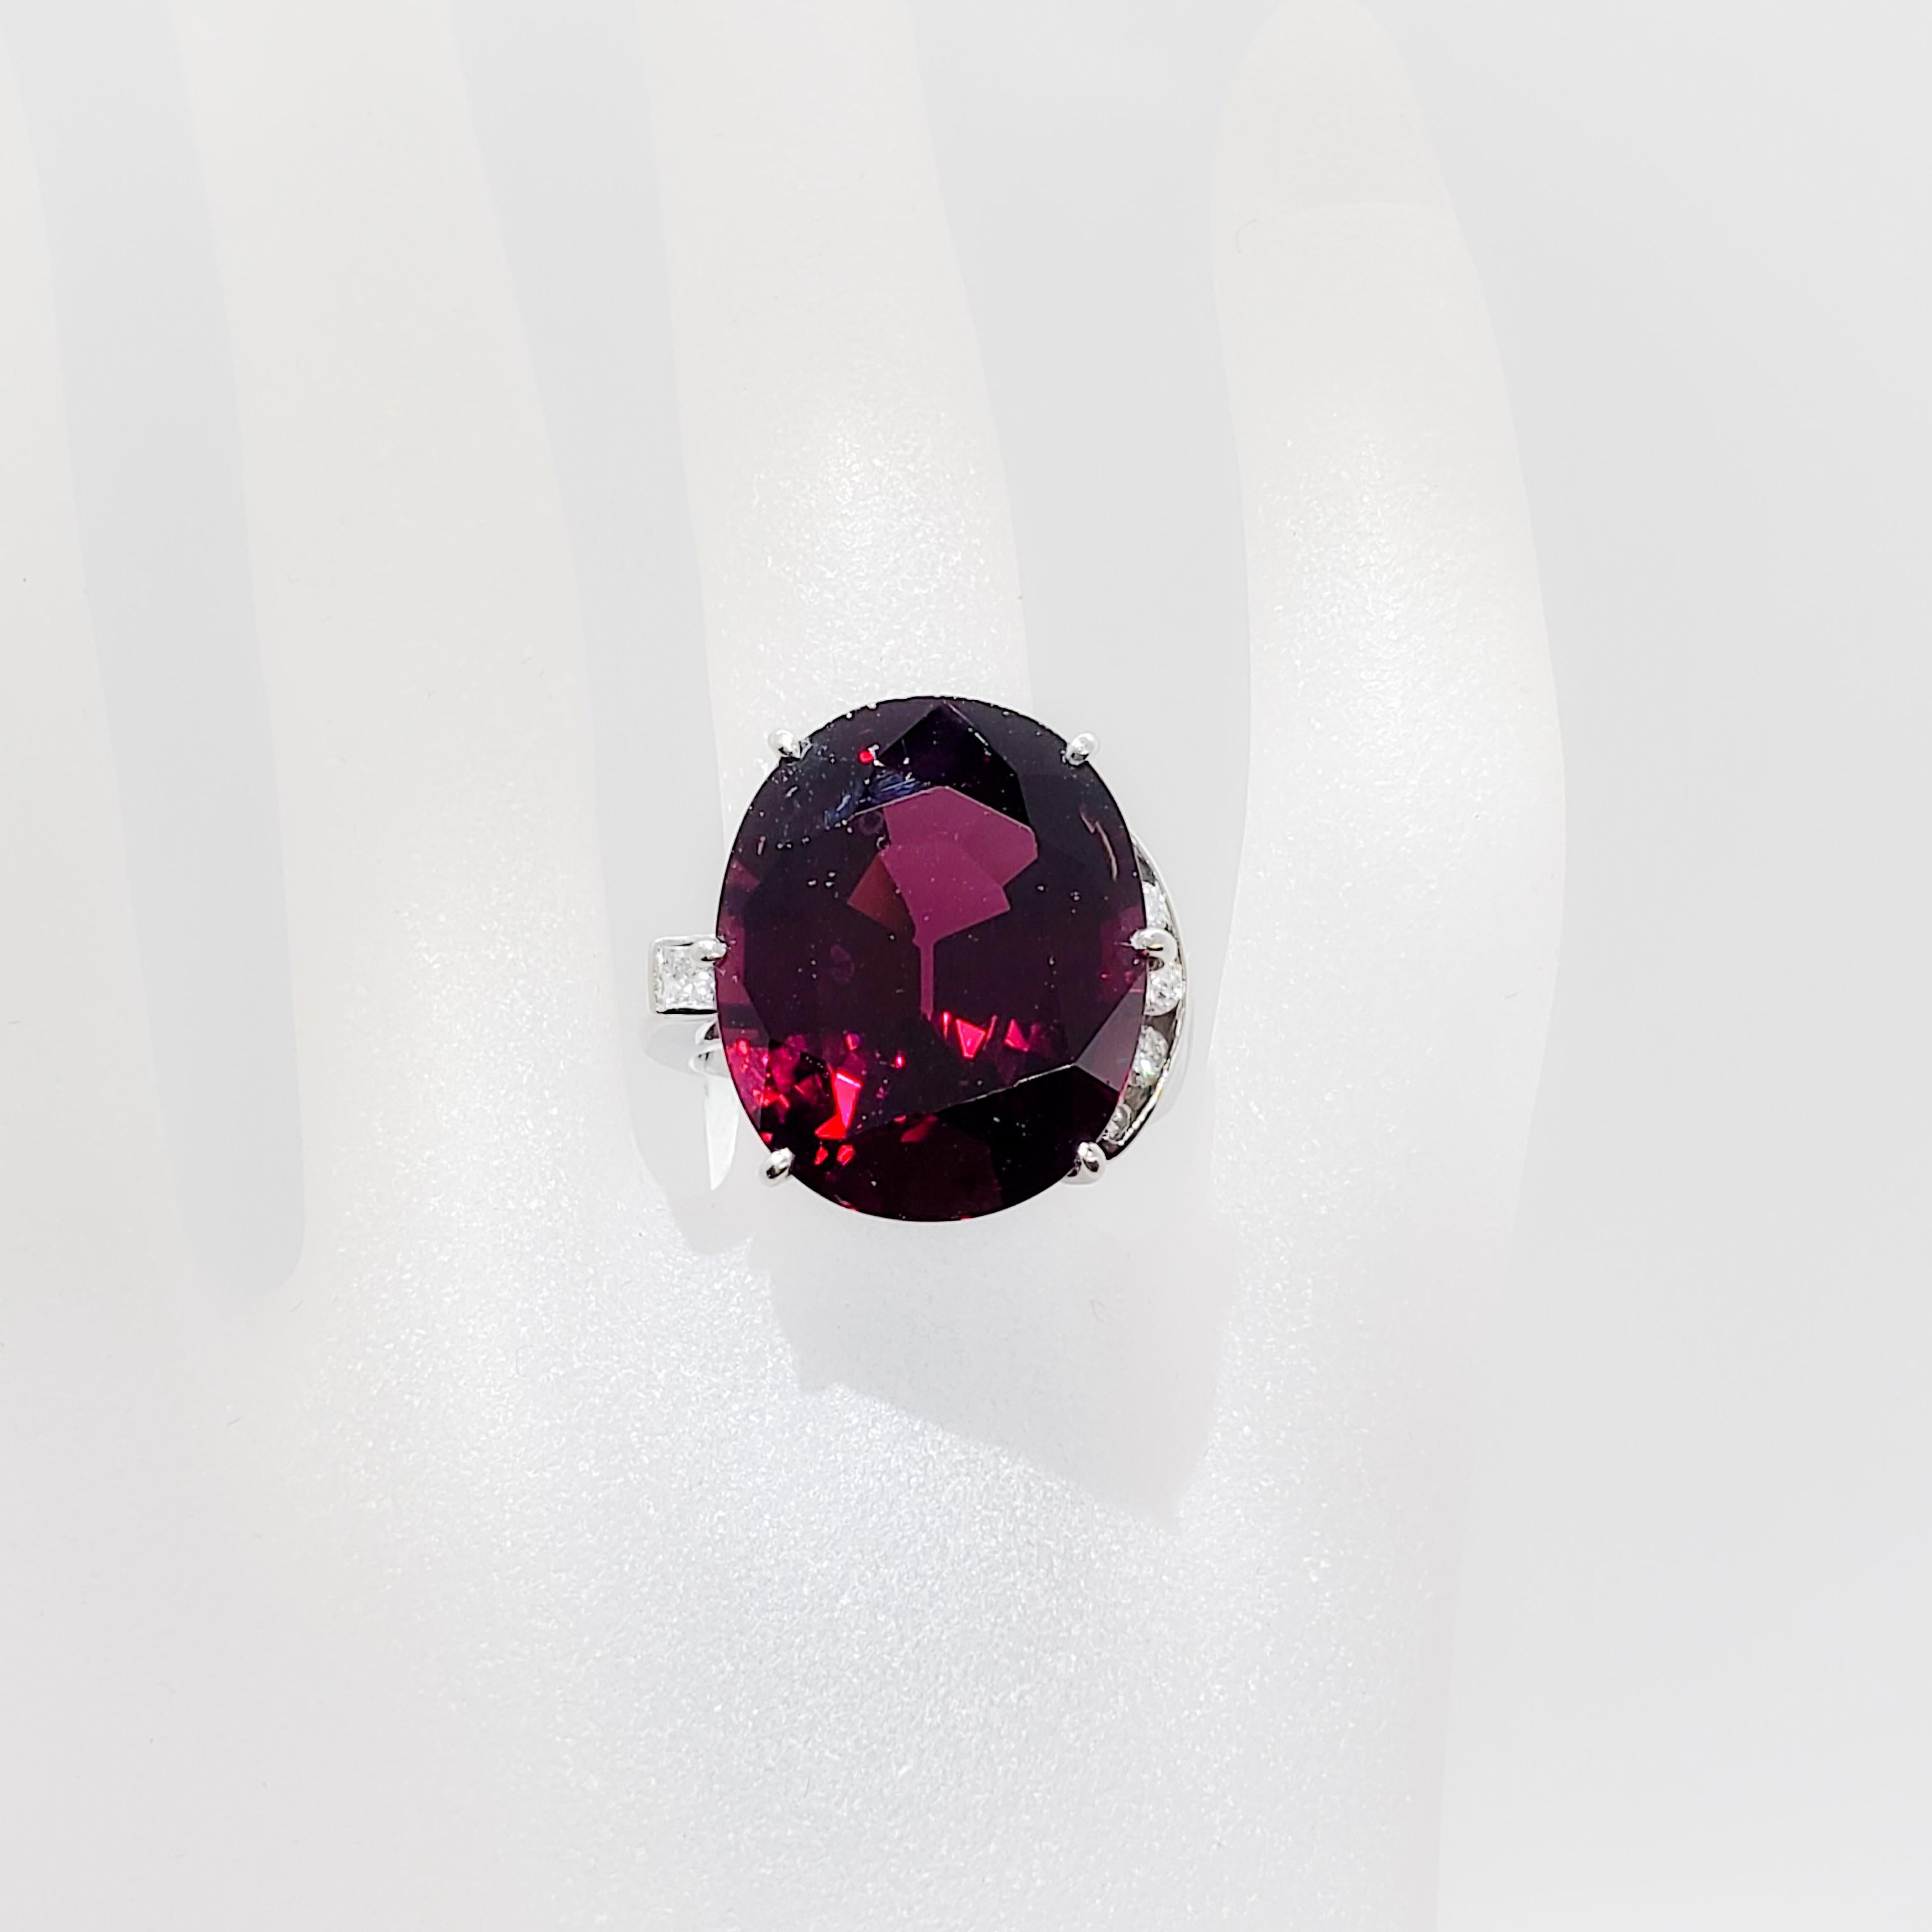 Stunning red garnet oval with deep color and beautiful crystal weighing 23.52 cts.  Six white diamond rounds and squares of good quality weighing 0.27 cts. Handmade mounting in platinum.  Ring size 7.25.  Estate piece in excellent condition.